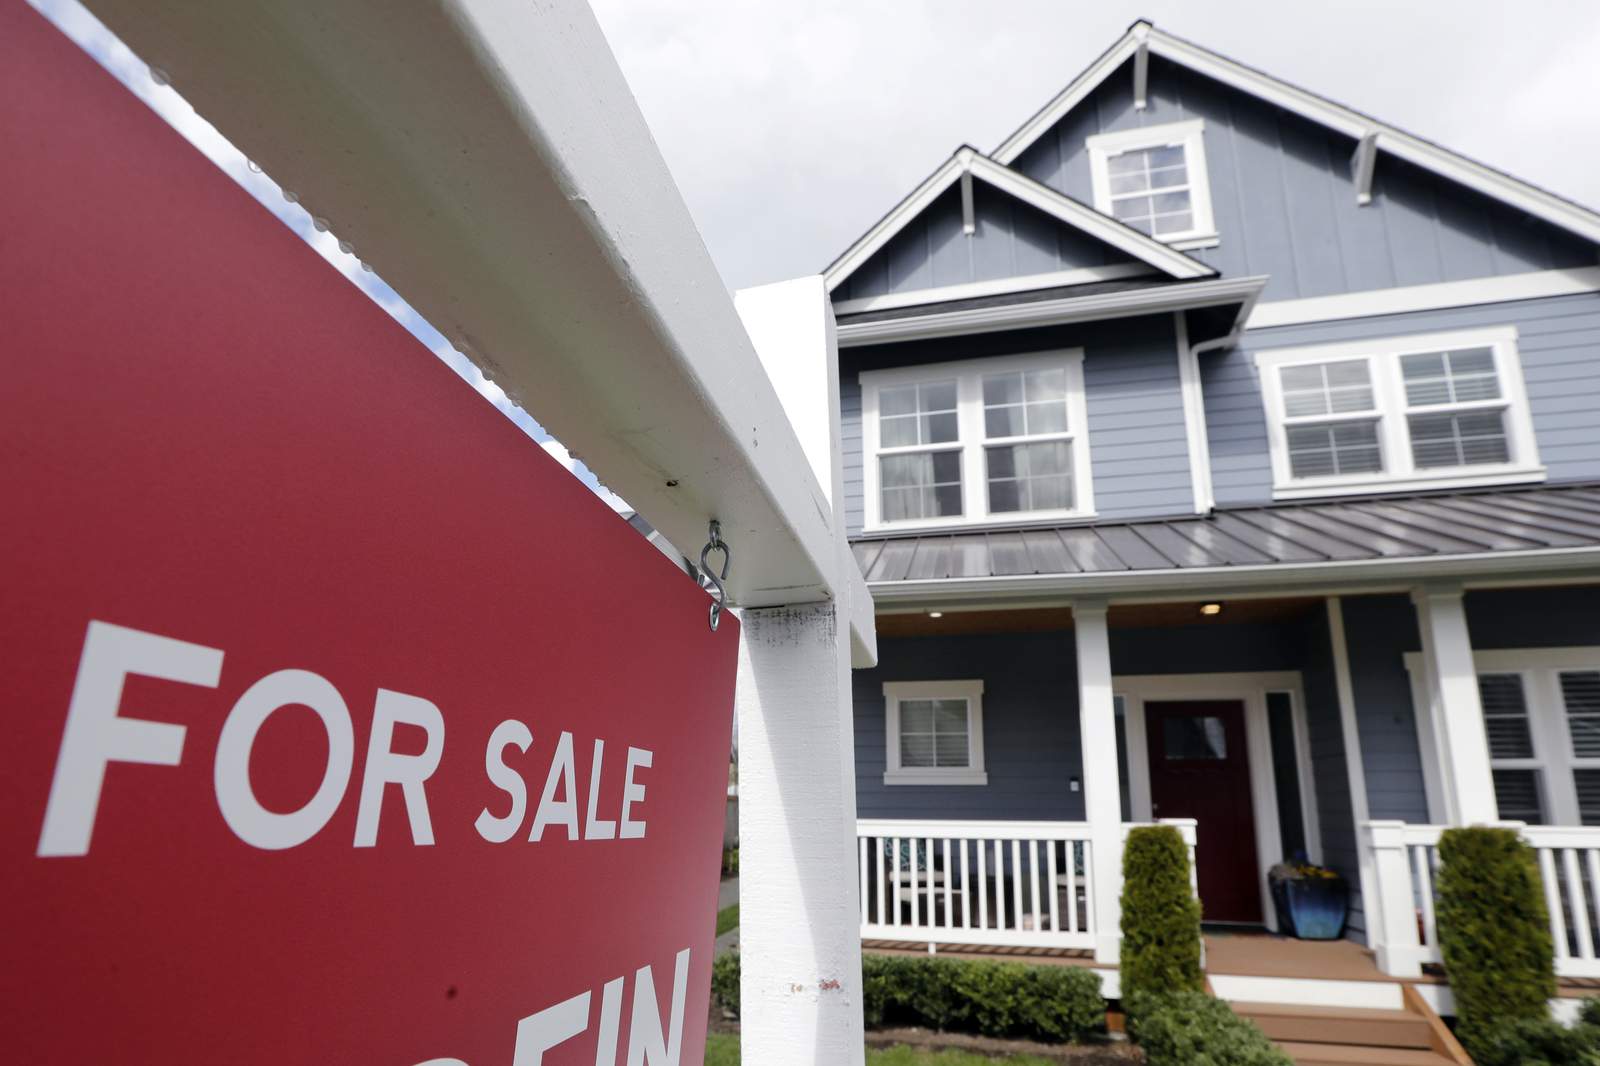 Breaking the stigma: Research shows uptick in Hispanics, Latinos investing in real estate